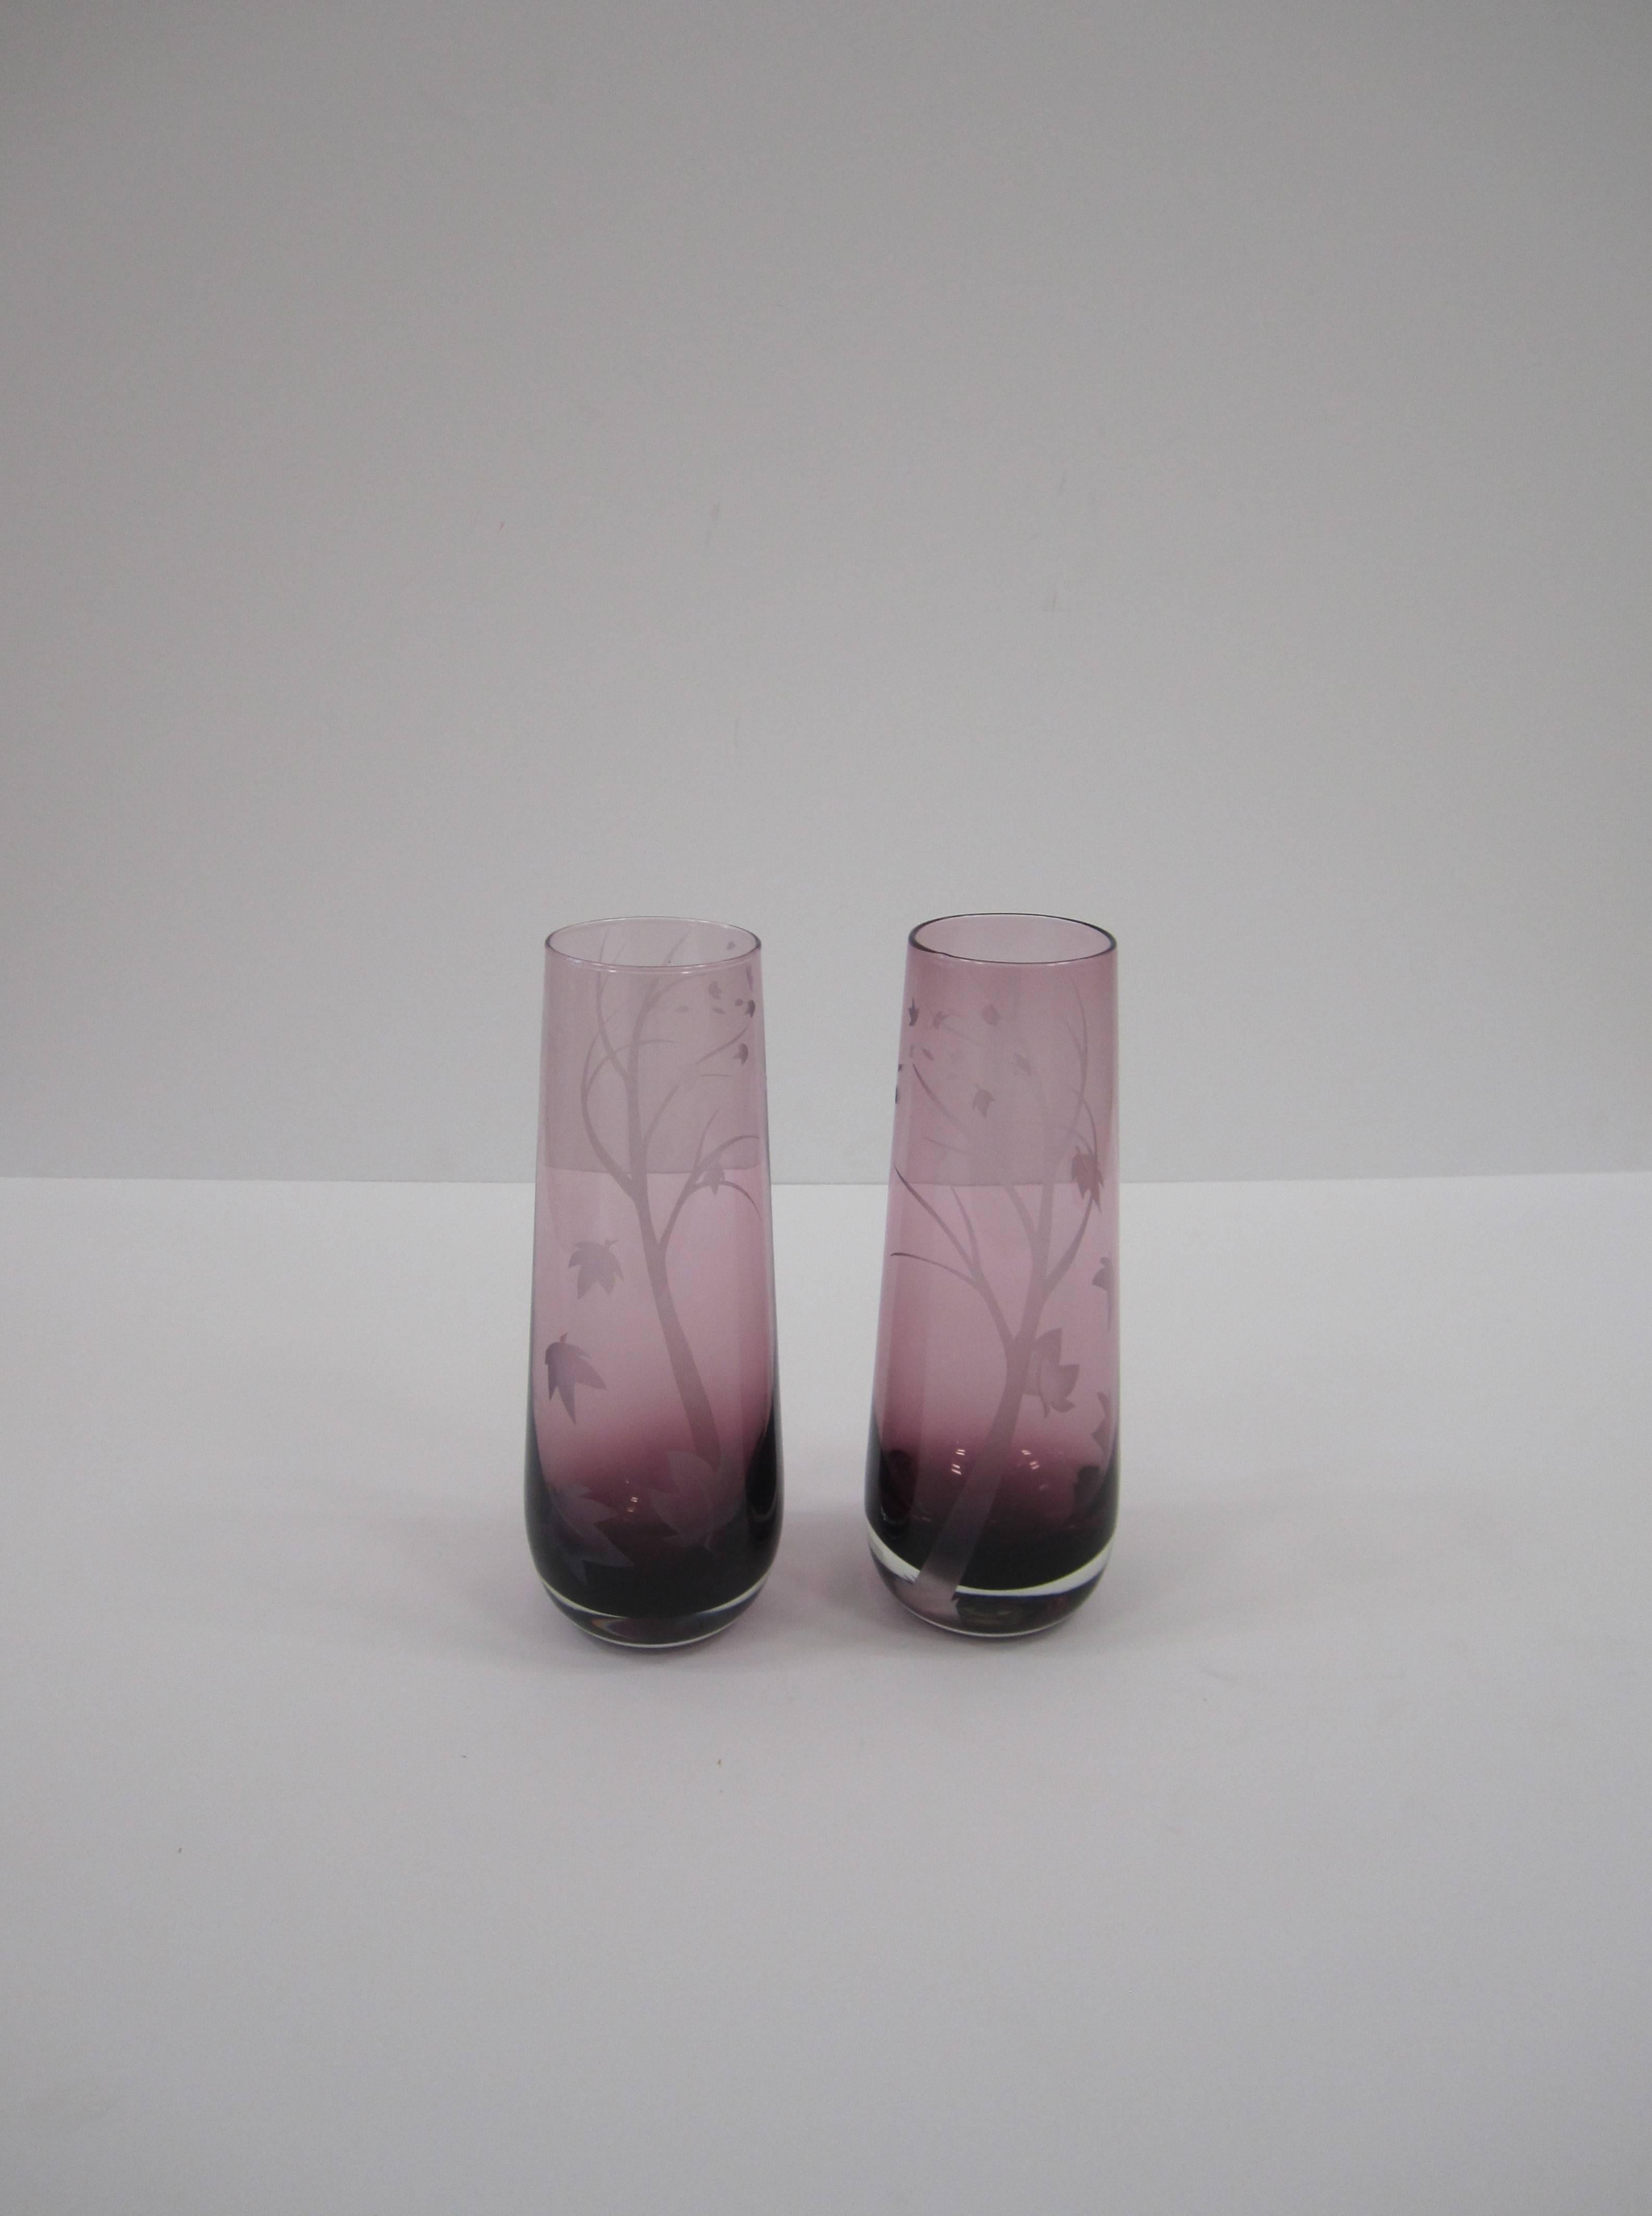 European Purple Amethyst Art Glass Vases, 1980s, Pair and Signed